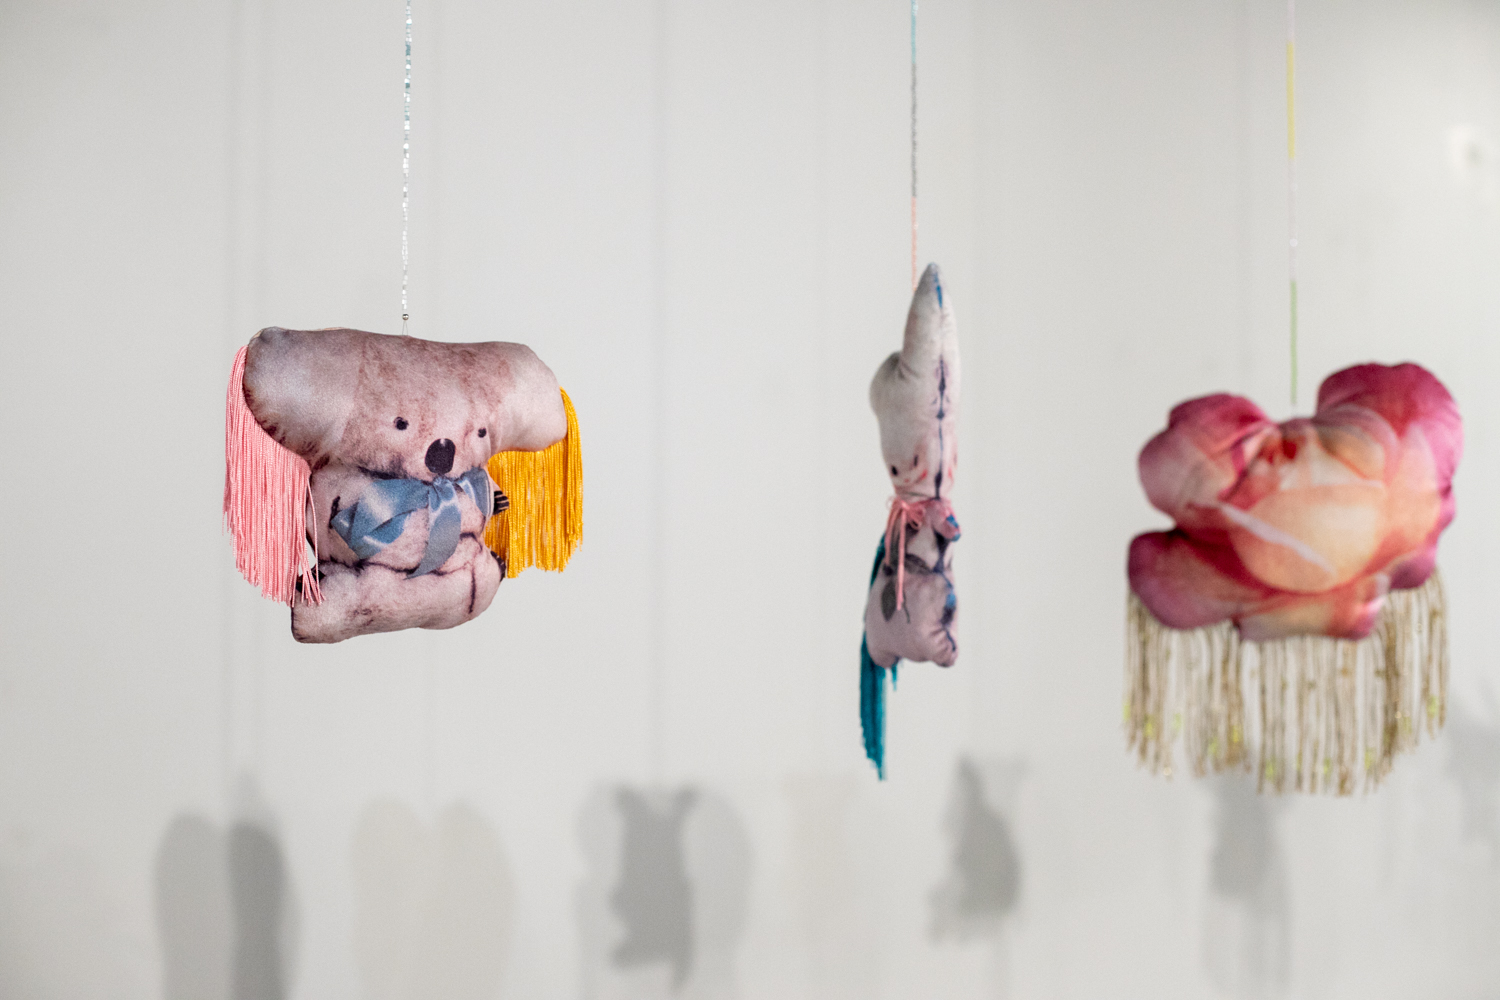  Holly Leonardson, Untiled, 2019, found images digitally printed on velvet, wool stuffed, polyester fringing, glass beads, craft materials, dimensions variable.  Photography by Mel De Ruyter  